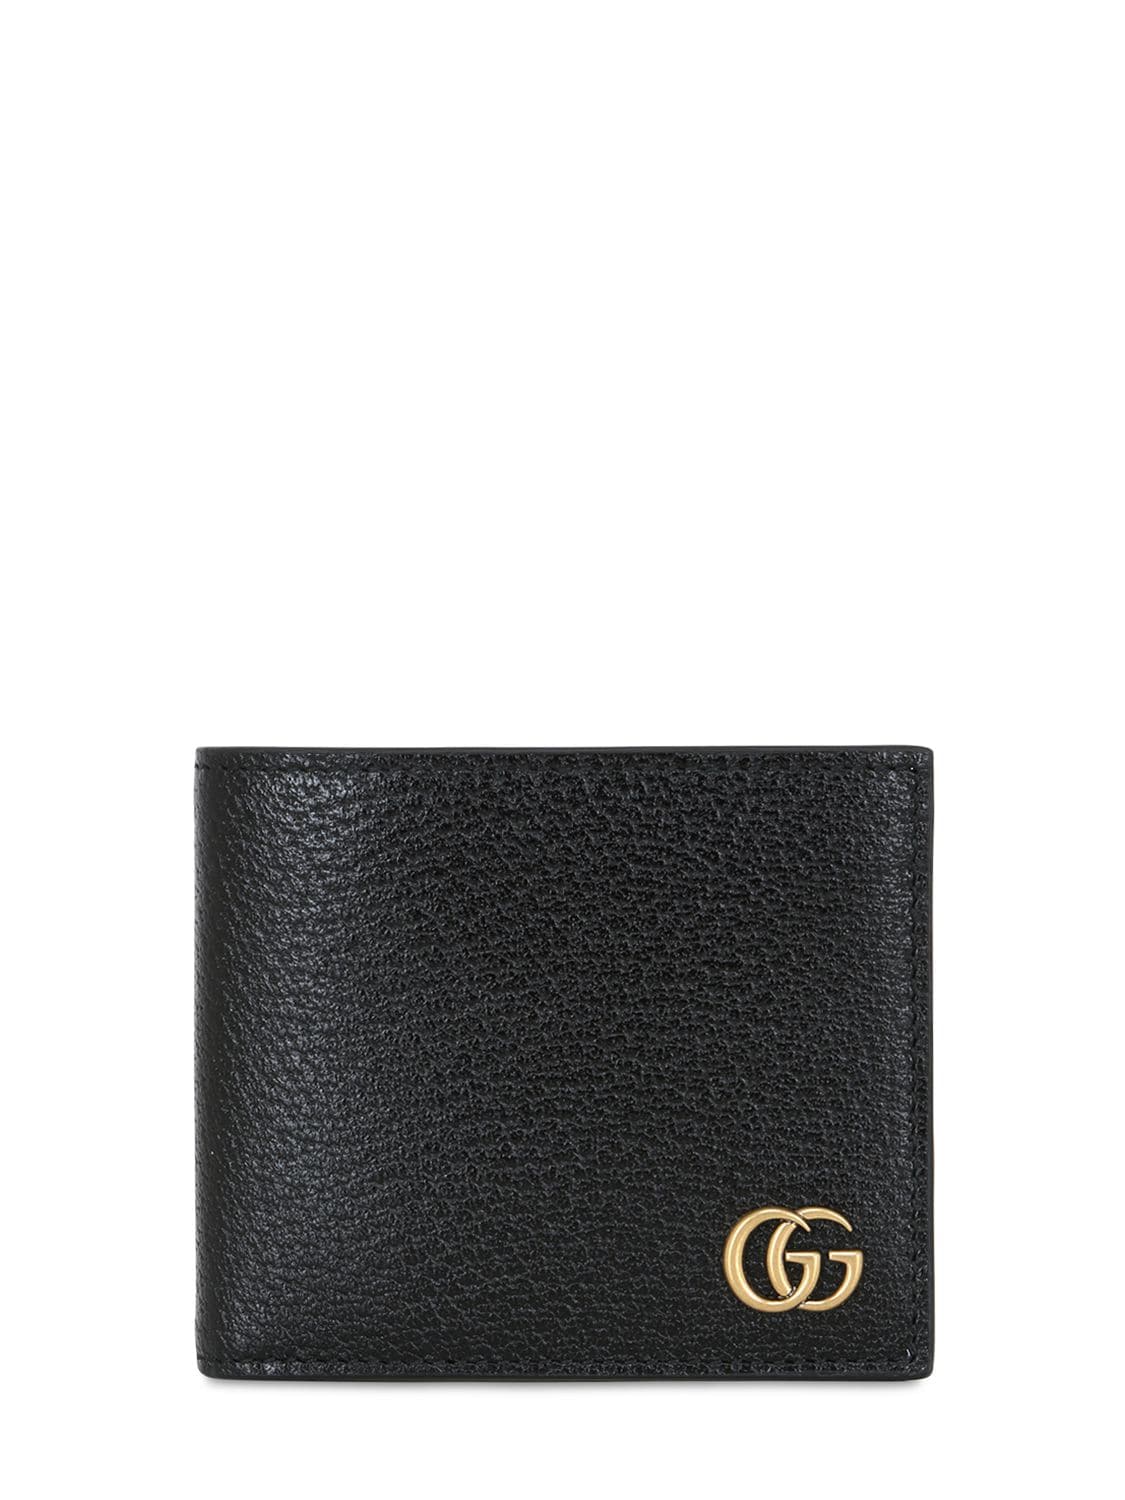 Gg Marmont Leather Classic Wallet